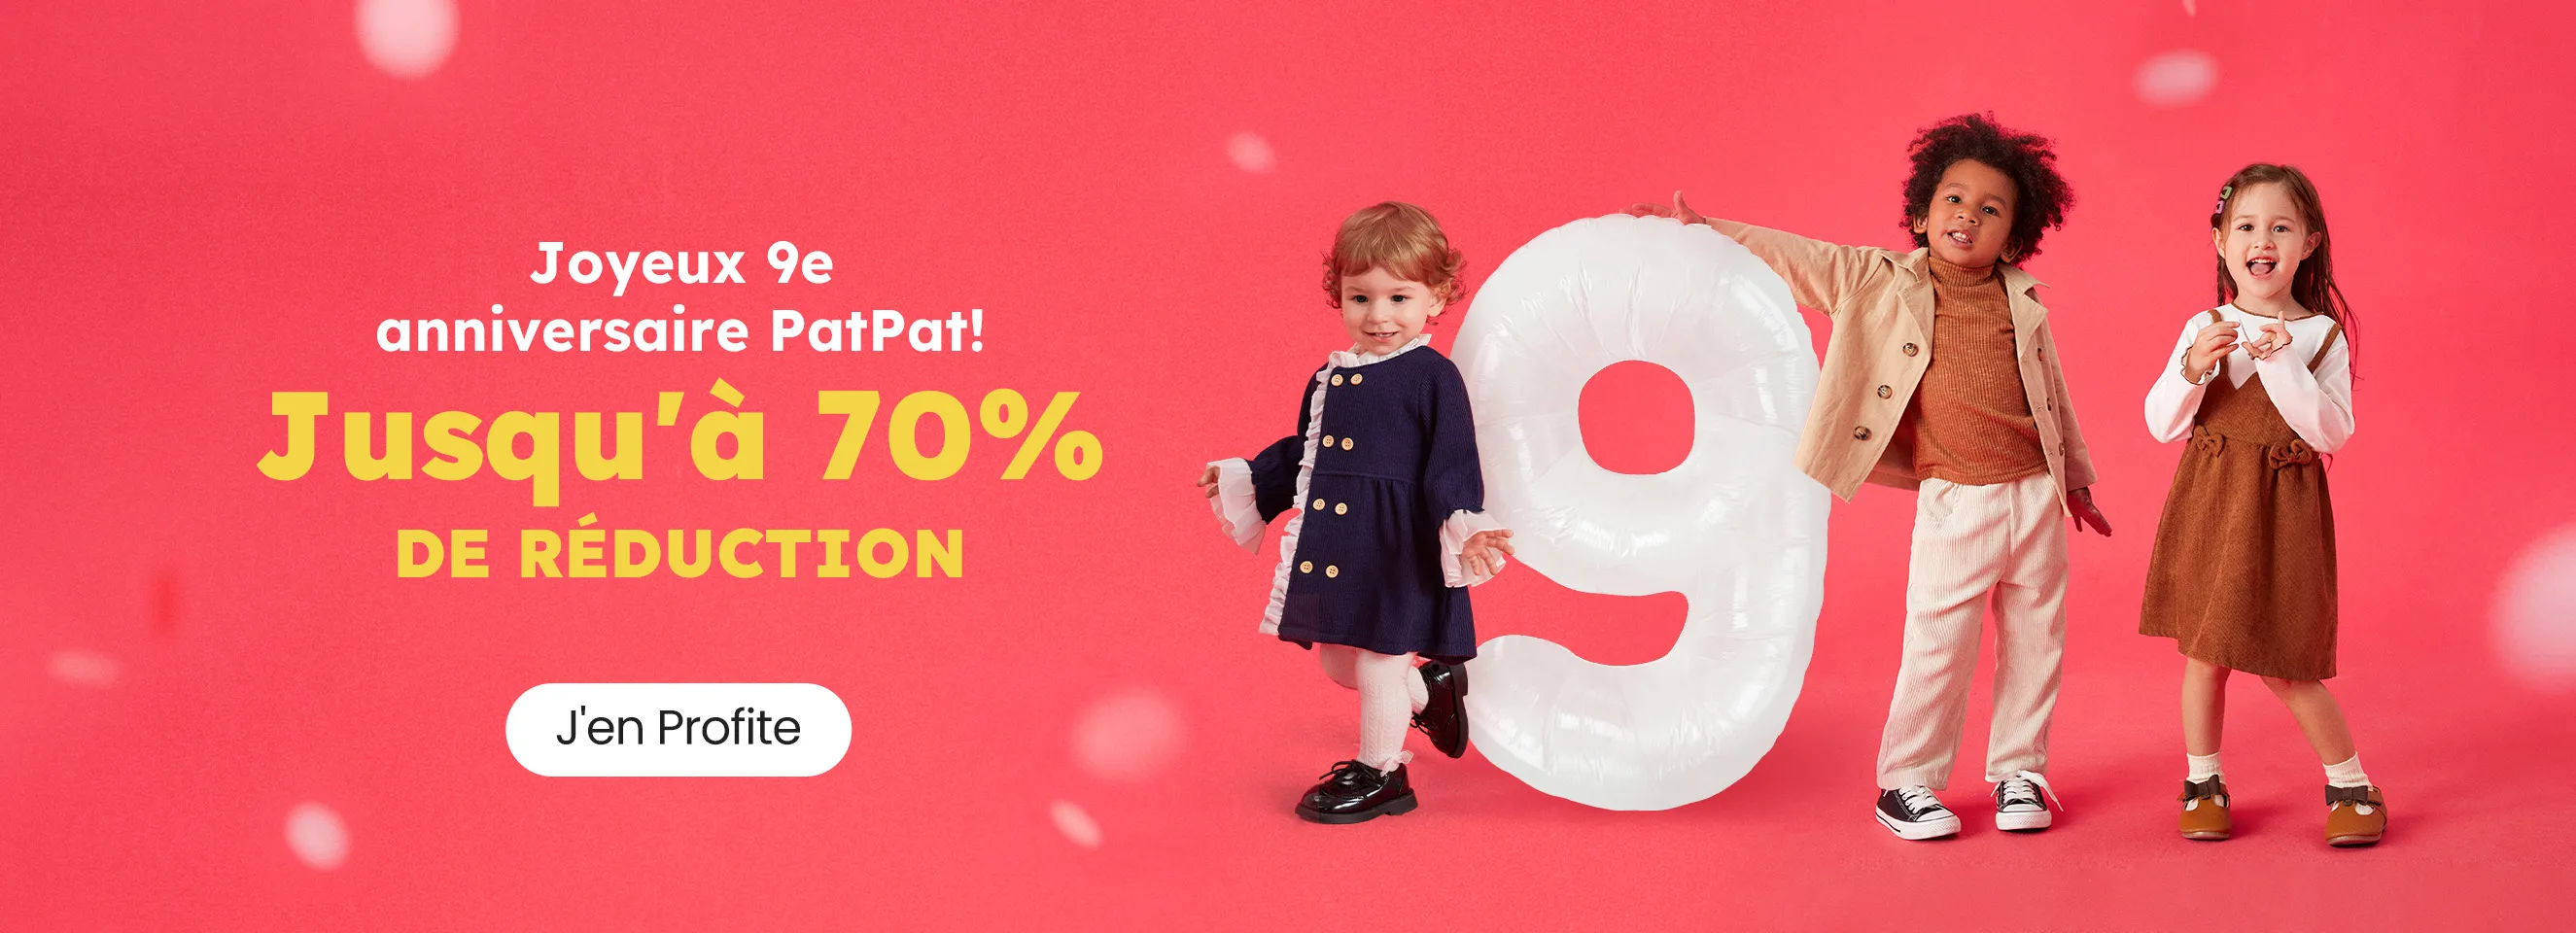 Click it to join PatPat's 9th Anniversary Sale activity